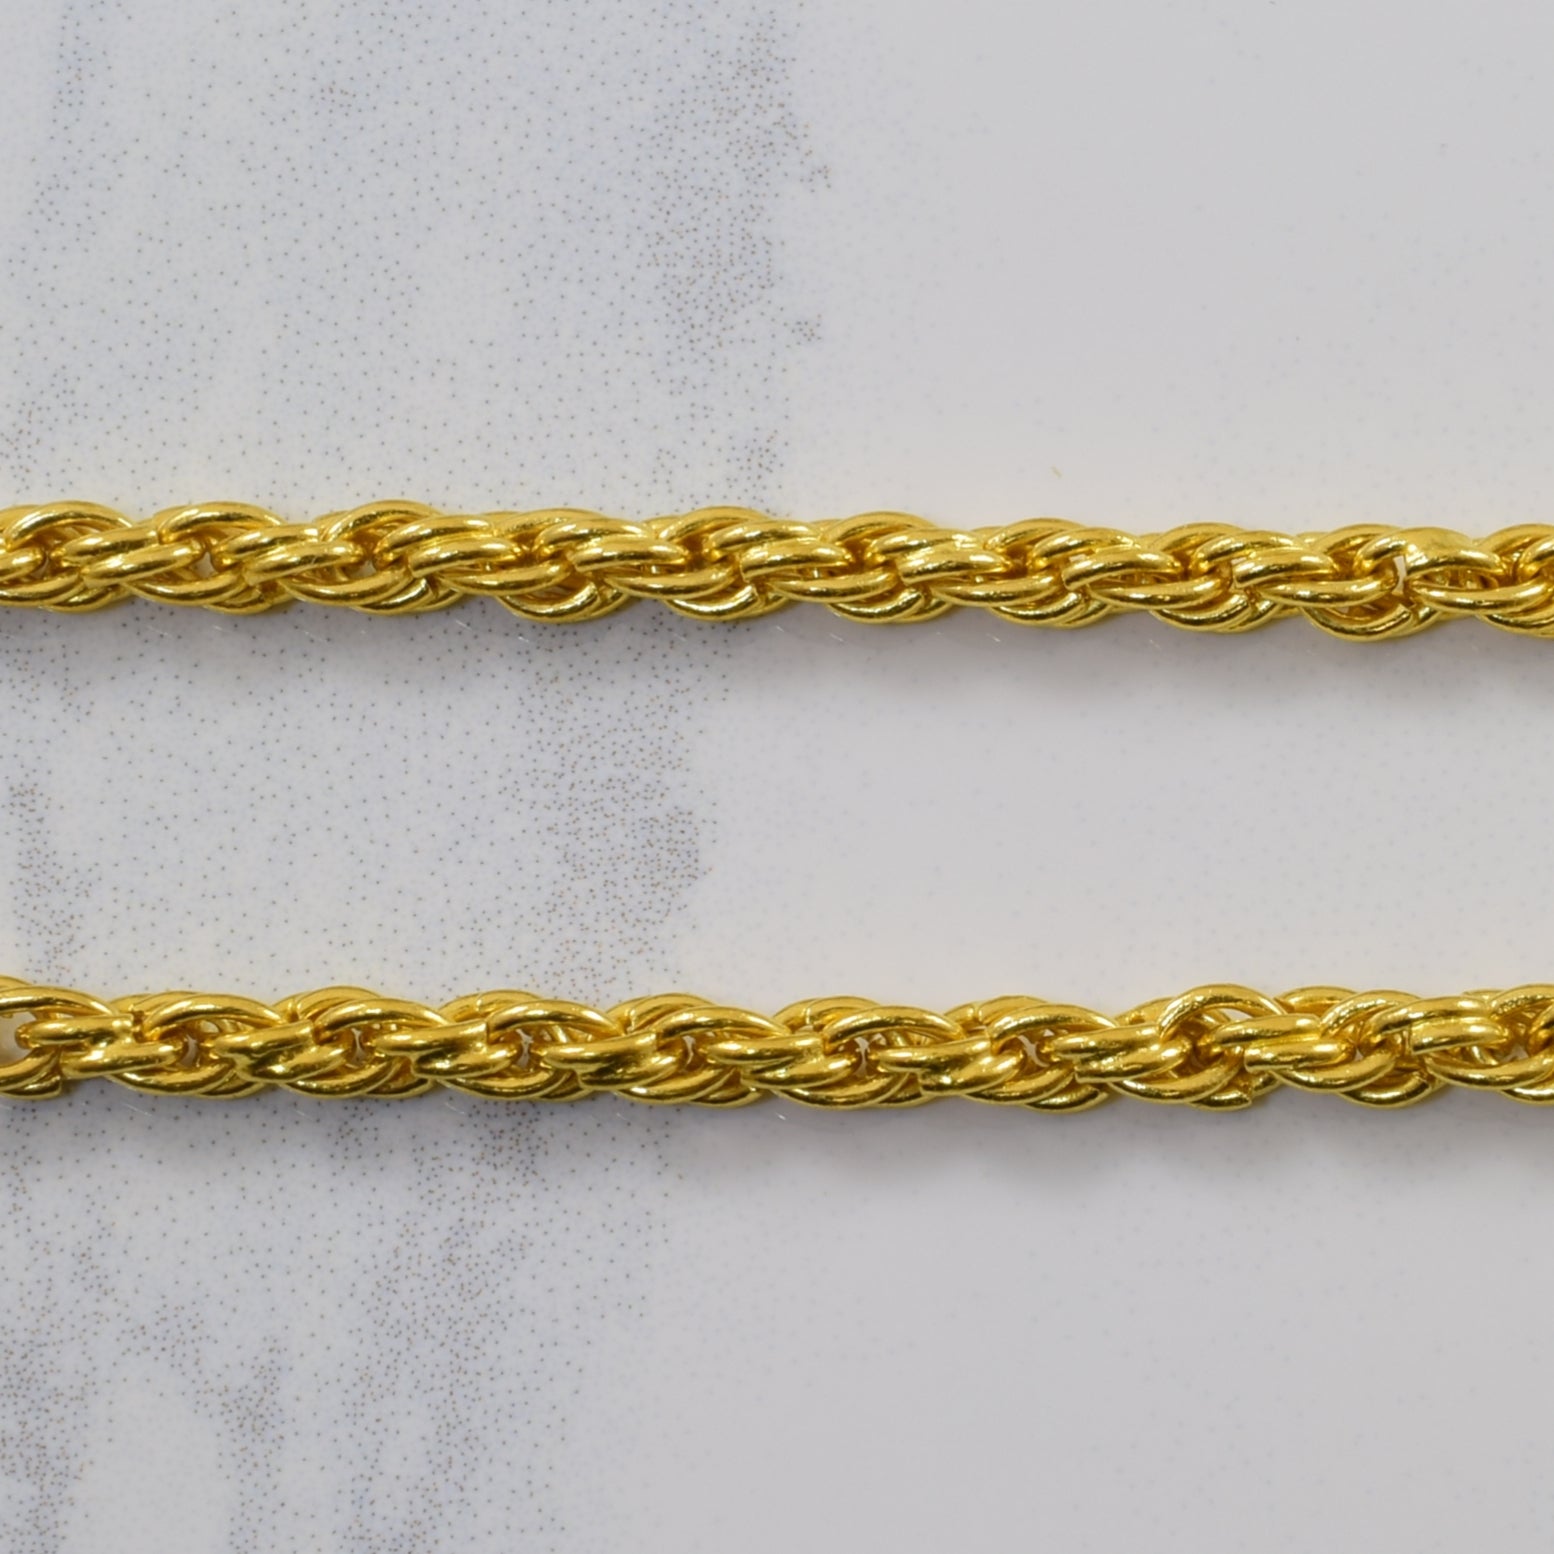 24k Yellow Gold French Rope Chain | 26